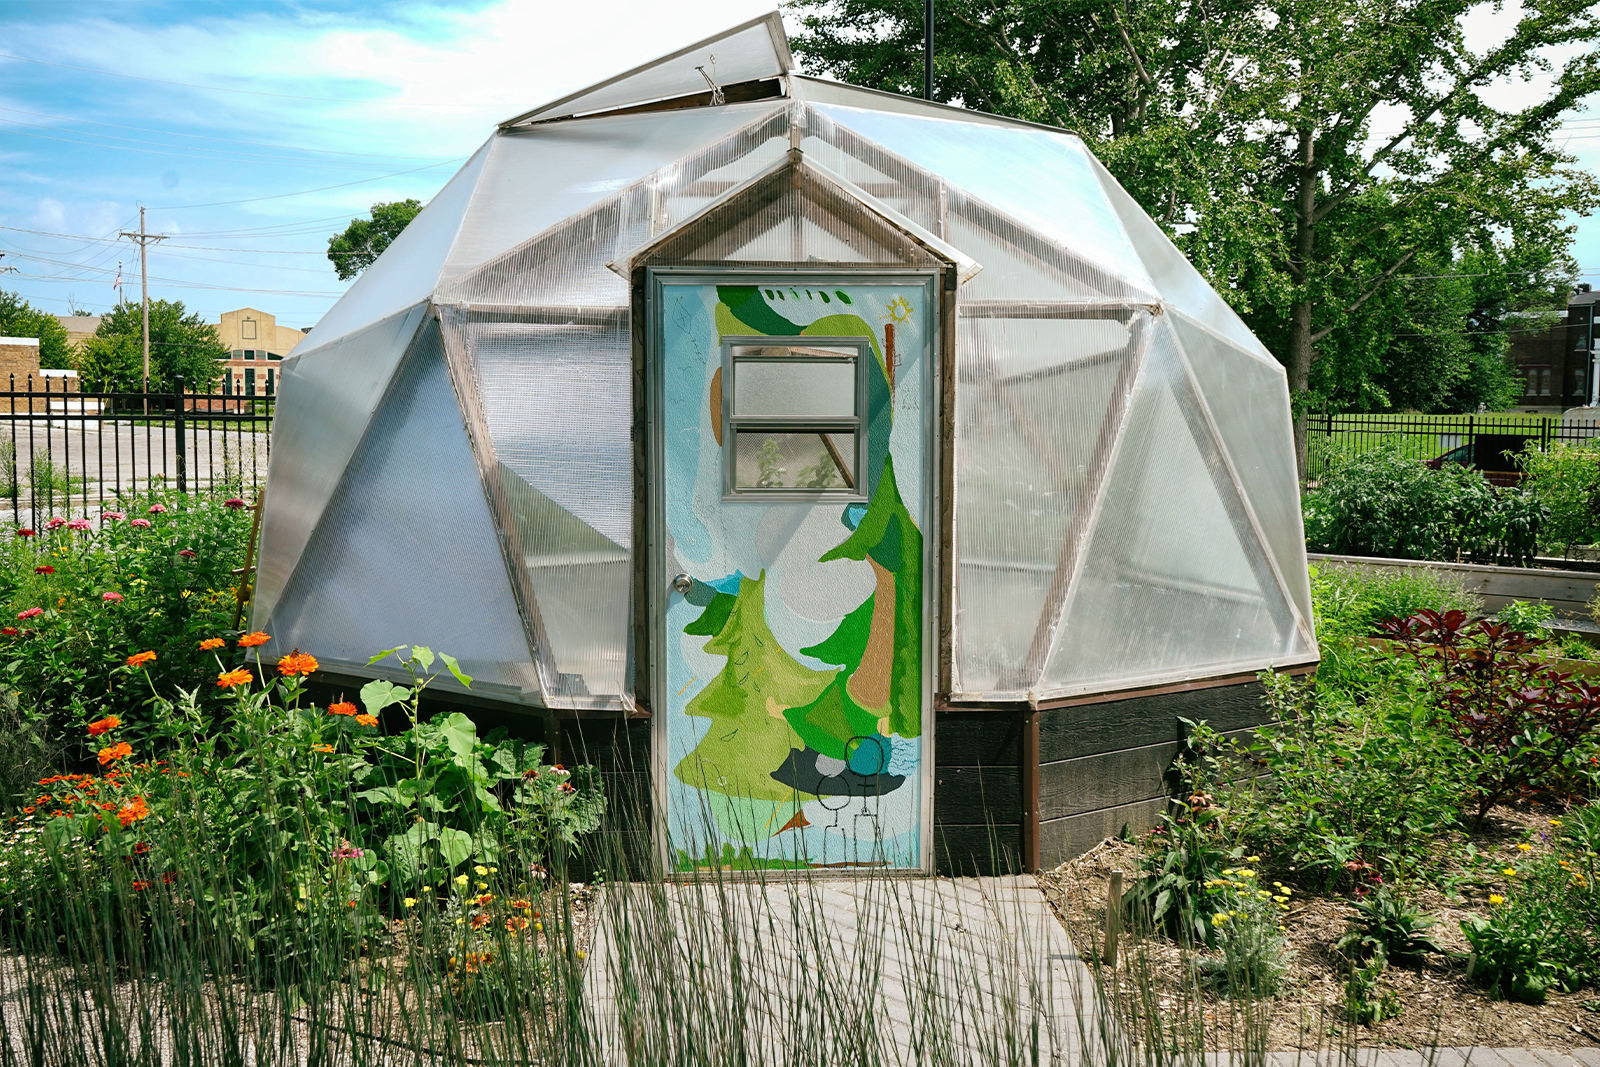 Abundance garden - photo of geodesic dome in Union garden. The garden is blooming with flowers and grasses and the door of the dome is painted with a bright, abstract nature scene.